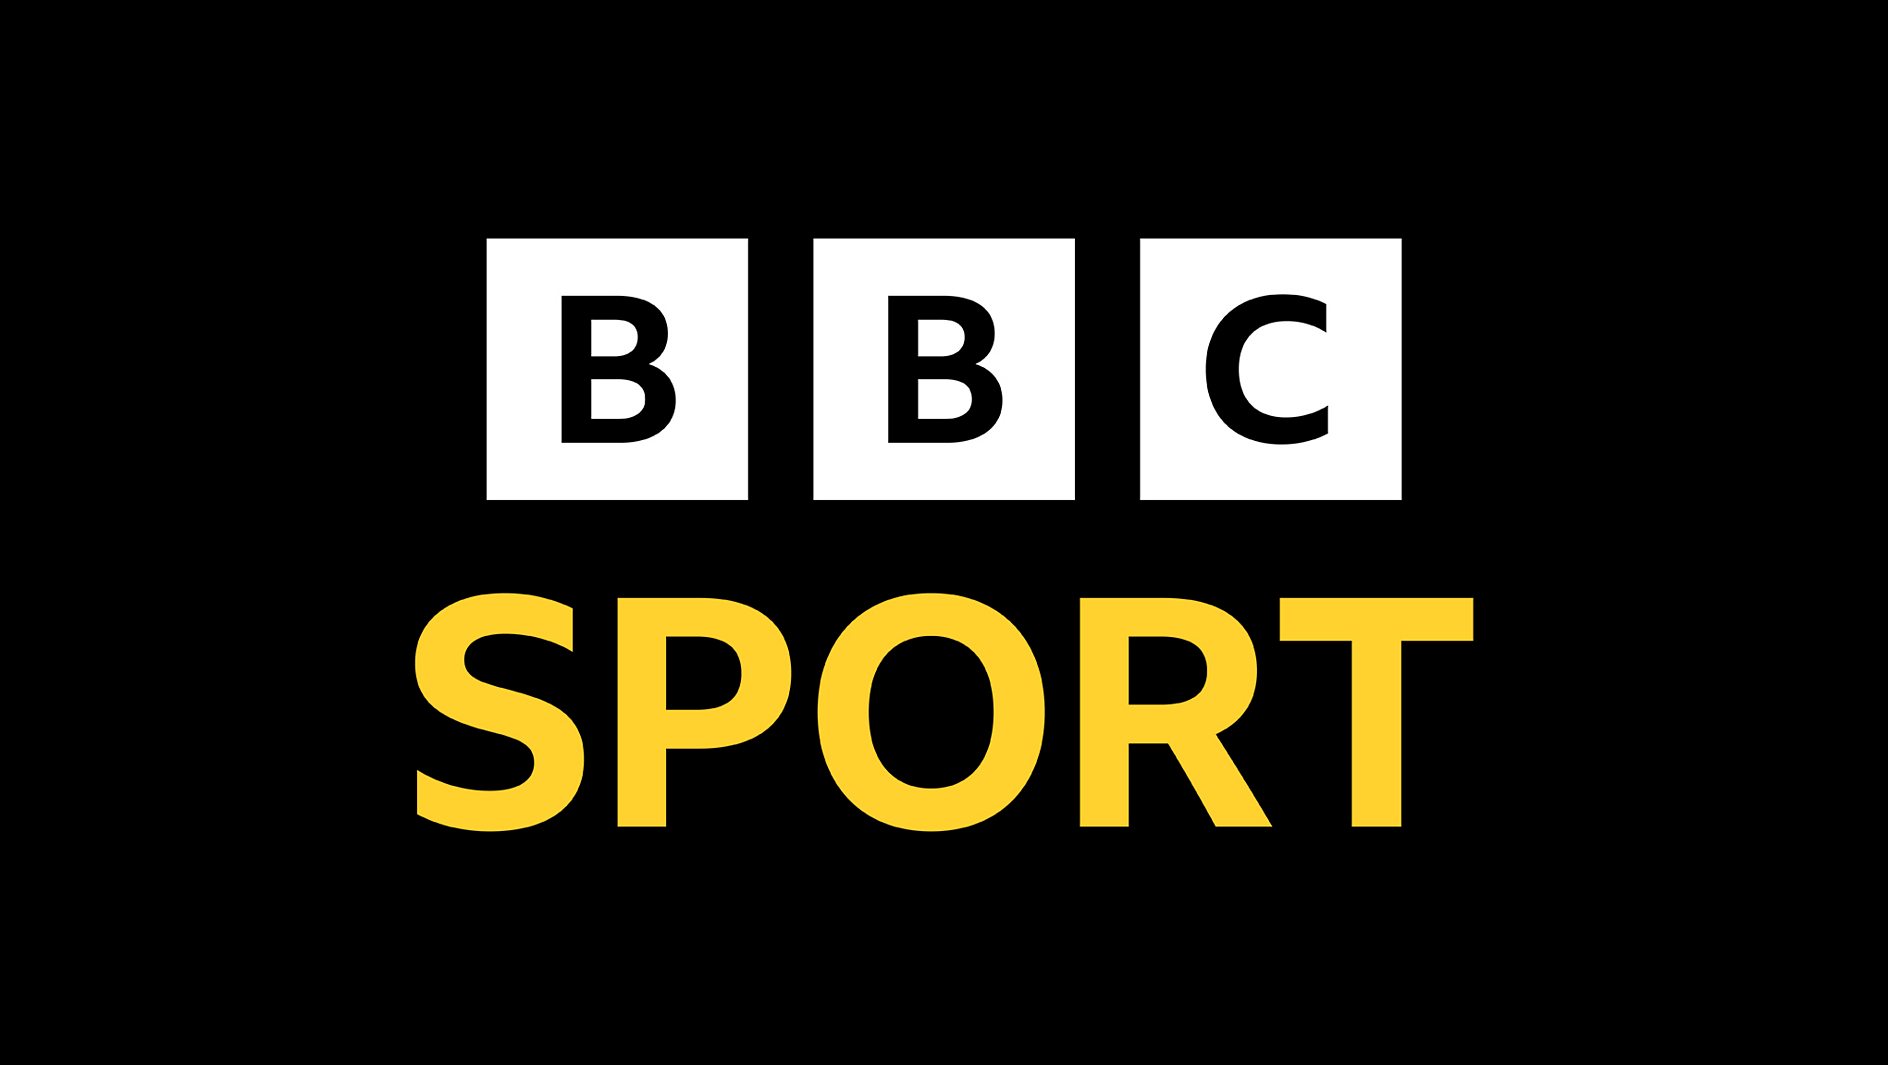 BBC Sport secures historic Super League TV rights deal and expands Challenge Cup digital offering